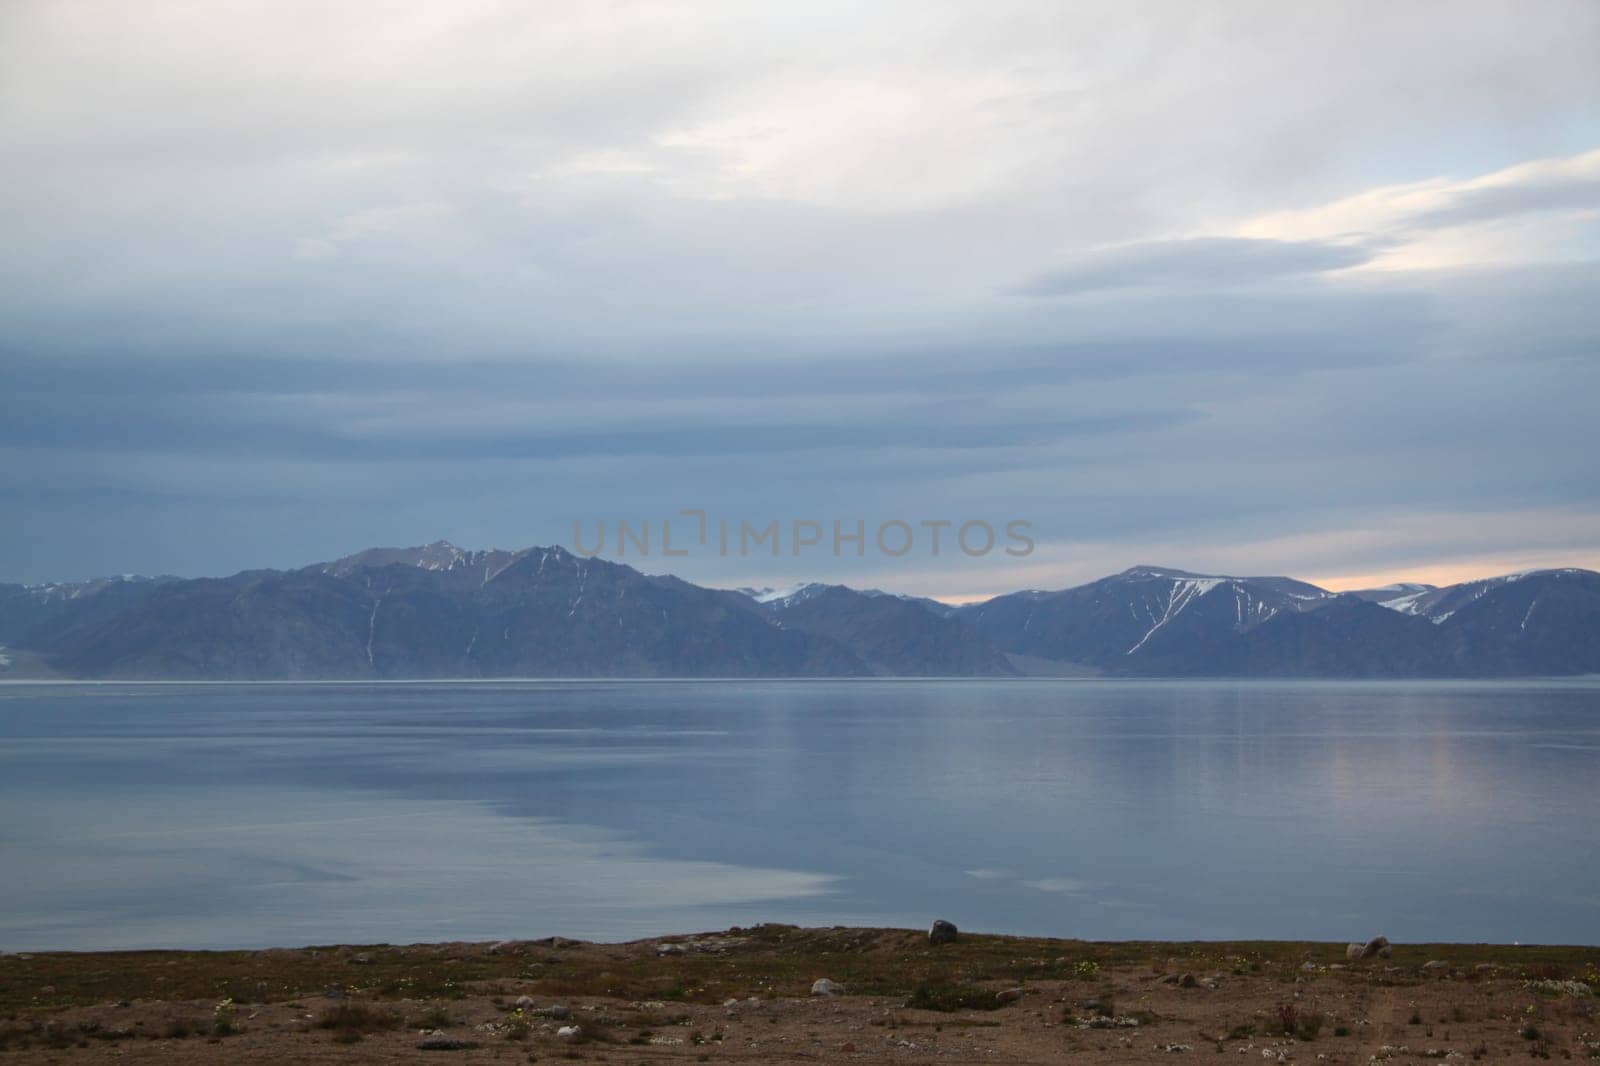 View of mountains across the bay from the community of Pond Inlet, Nunavut, Canada by Granchinho